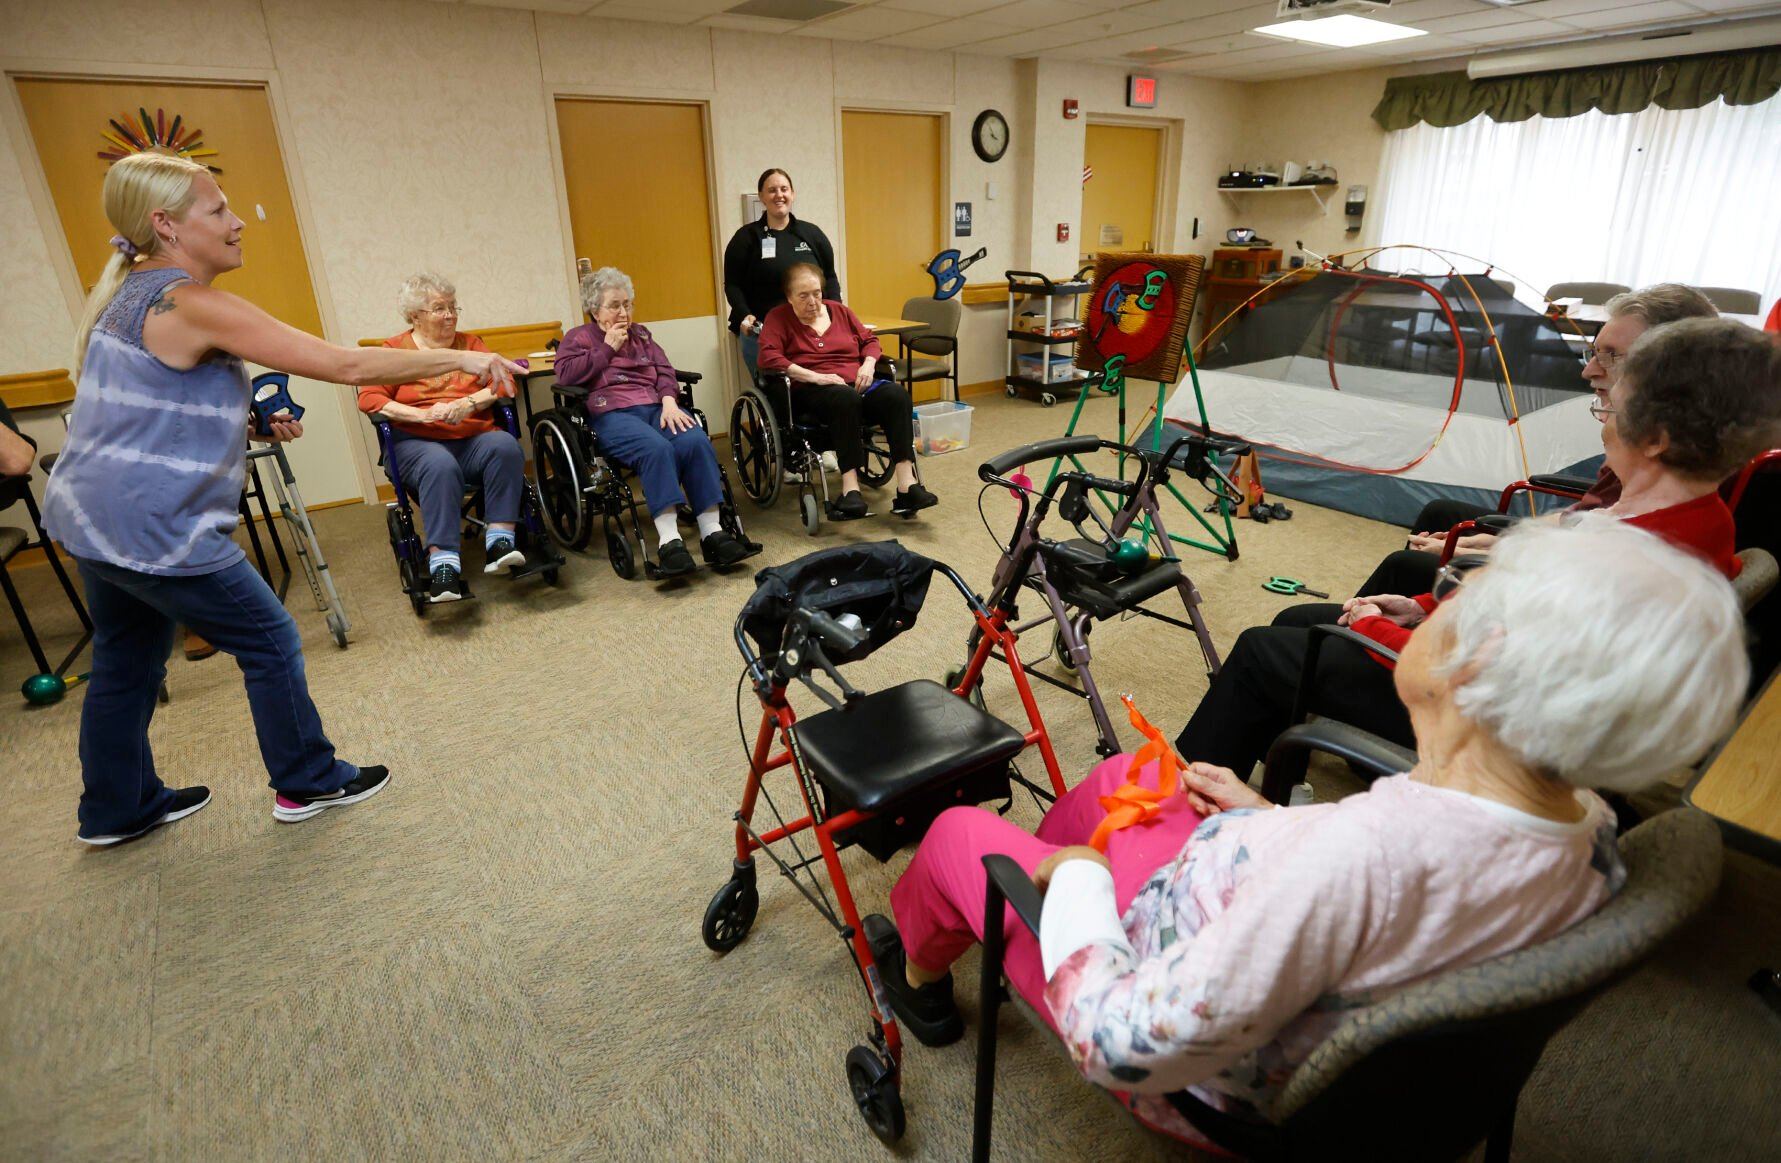 Julie Delaney, activities coordinator at Bethany Home, participates in an activity with residents at the facility.    PHOTO CREDIT: JESSICA REILLY
Telegraph Herald